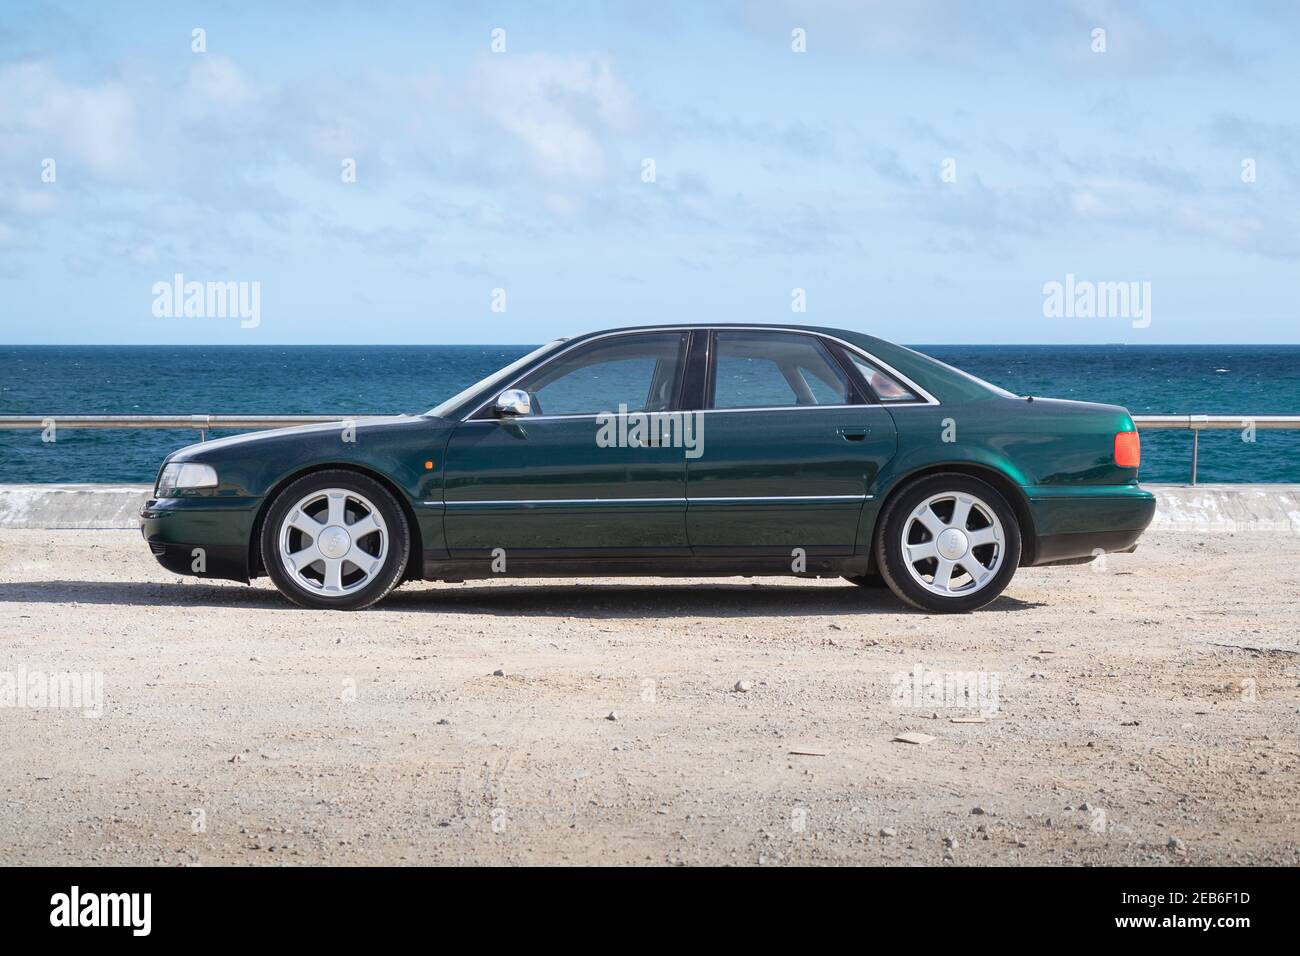 BARCELONA, SPAIN-FEBRUARY 2, 2021: Audi S8 (First generation, D2, 1996 - 2003) parking next to sea Stock Photo